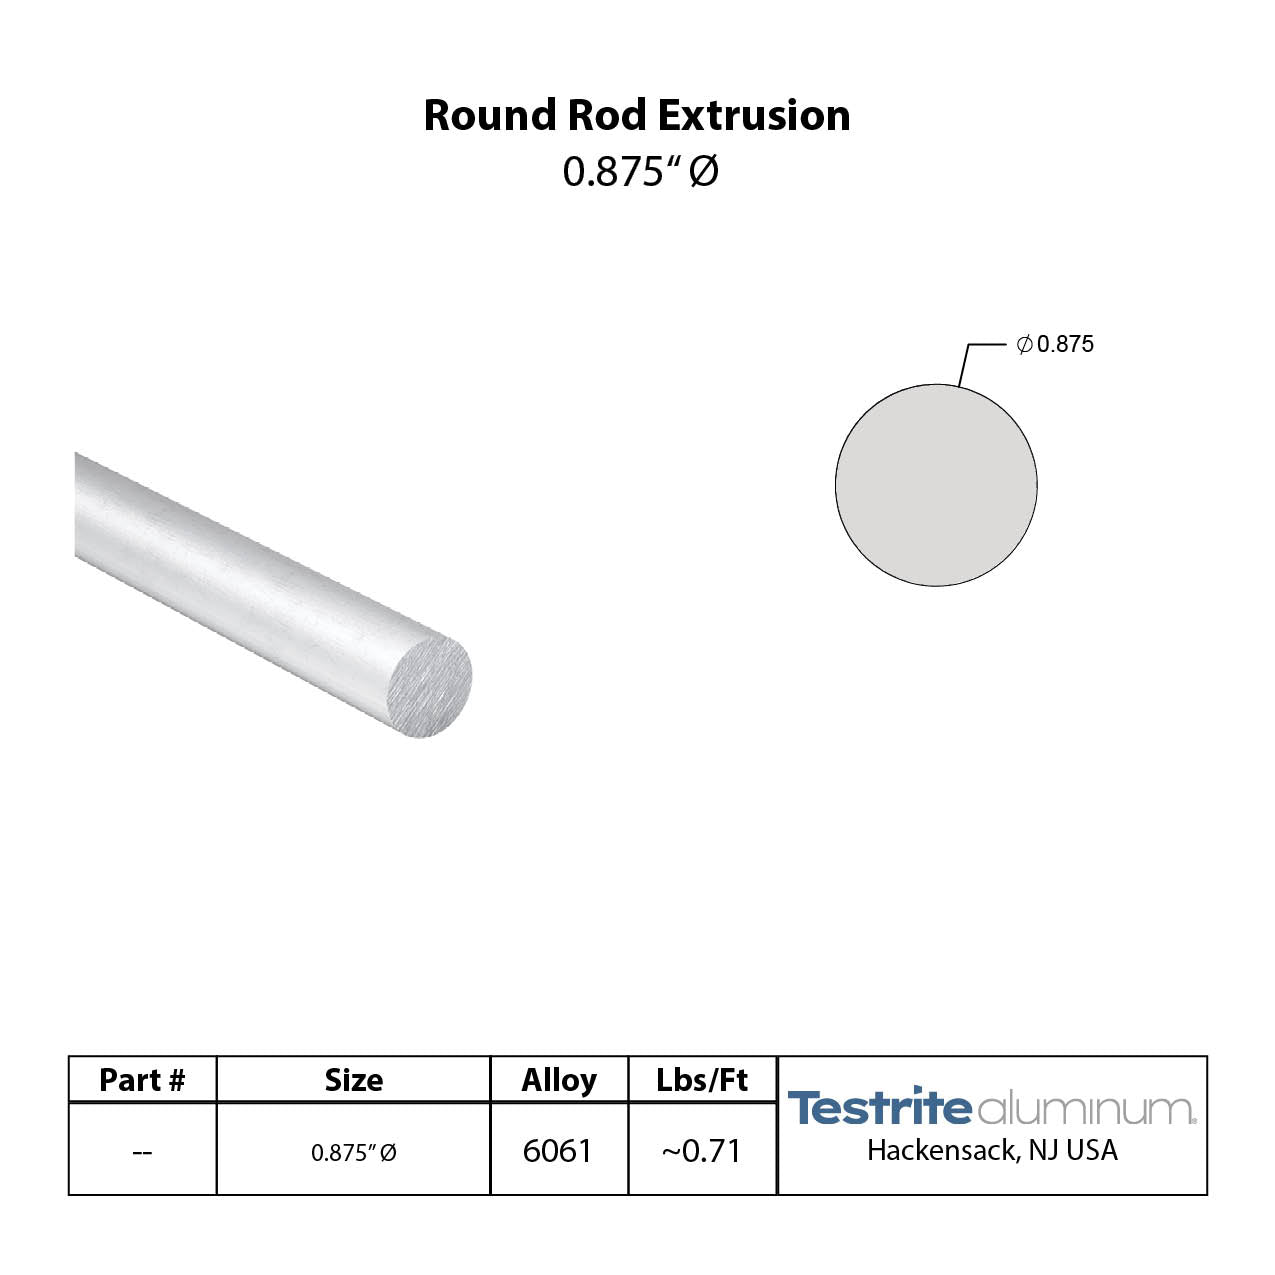 Specification sheet for 7/8" Aluminum Rod, 0.875" Round Aluminum Rod Aluminum Round Bar Stock .875in Round Aluminum Solid including lbs per ft